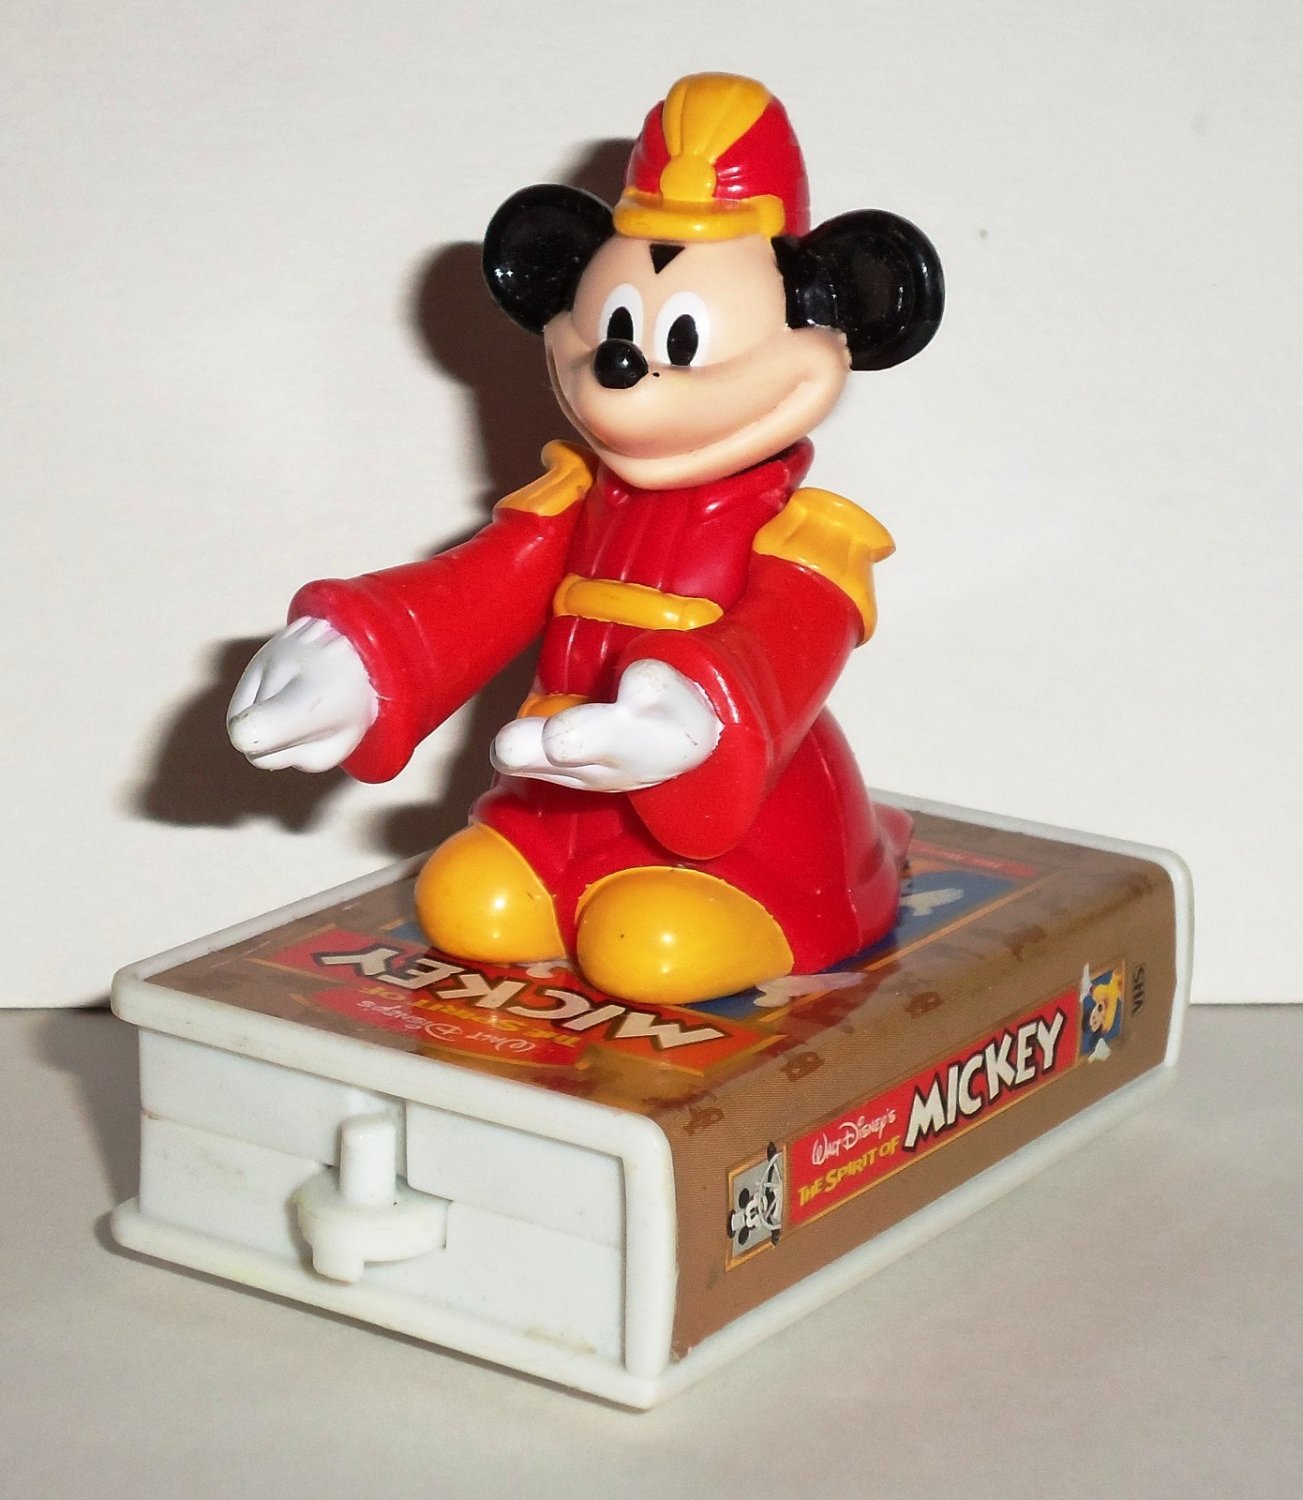 Details about   1998 Mcdonalds The Spirit of Mickey Mobile Figurine #1 